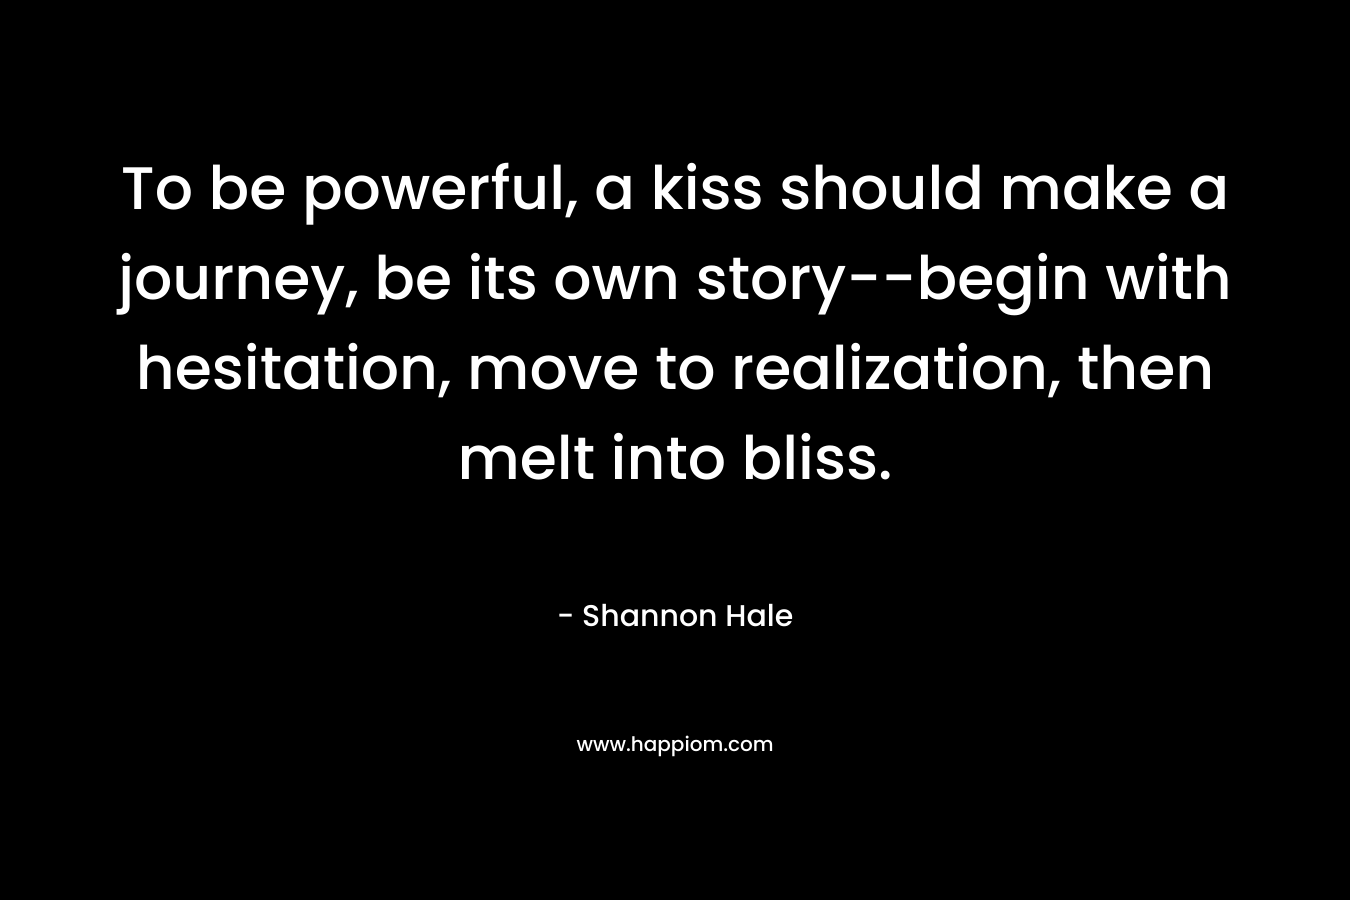 To be powerful, a kiss should make a journey, be its own story--begin with hesitation, move to realization, then melt into bliss.